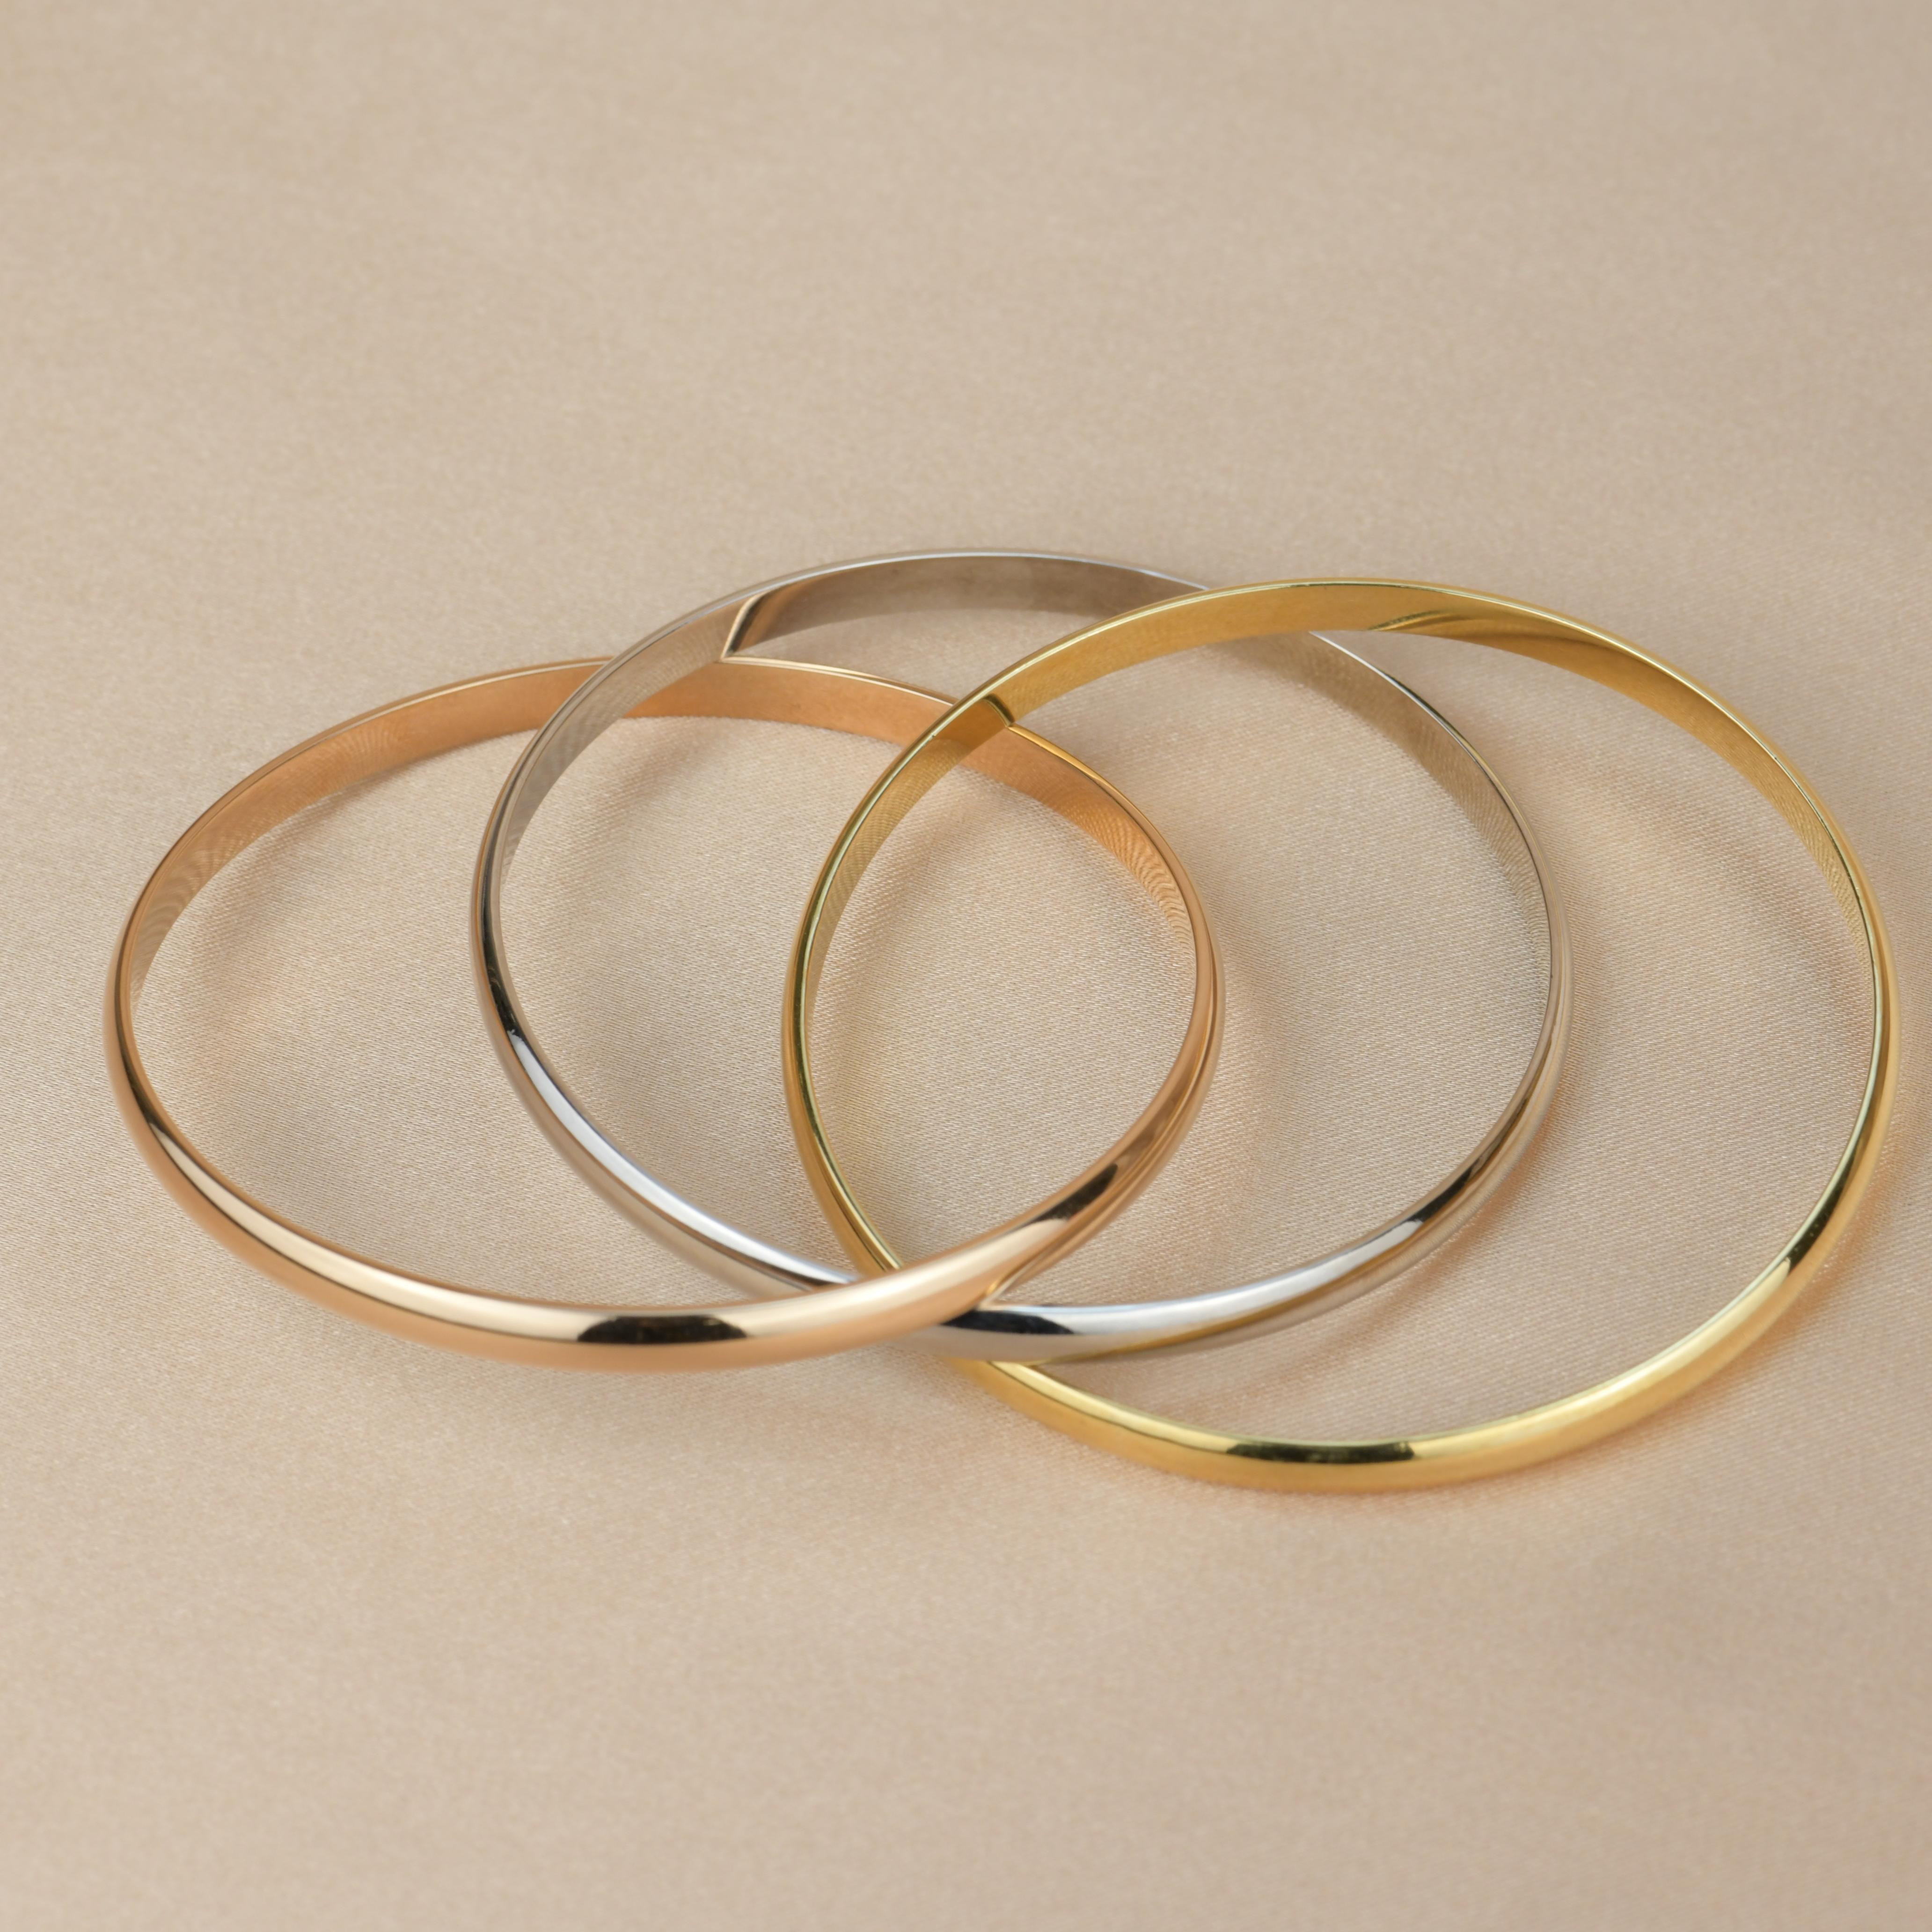 Cartier Trinity 18K White, Yellow and Rose Gold Bracelet 3